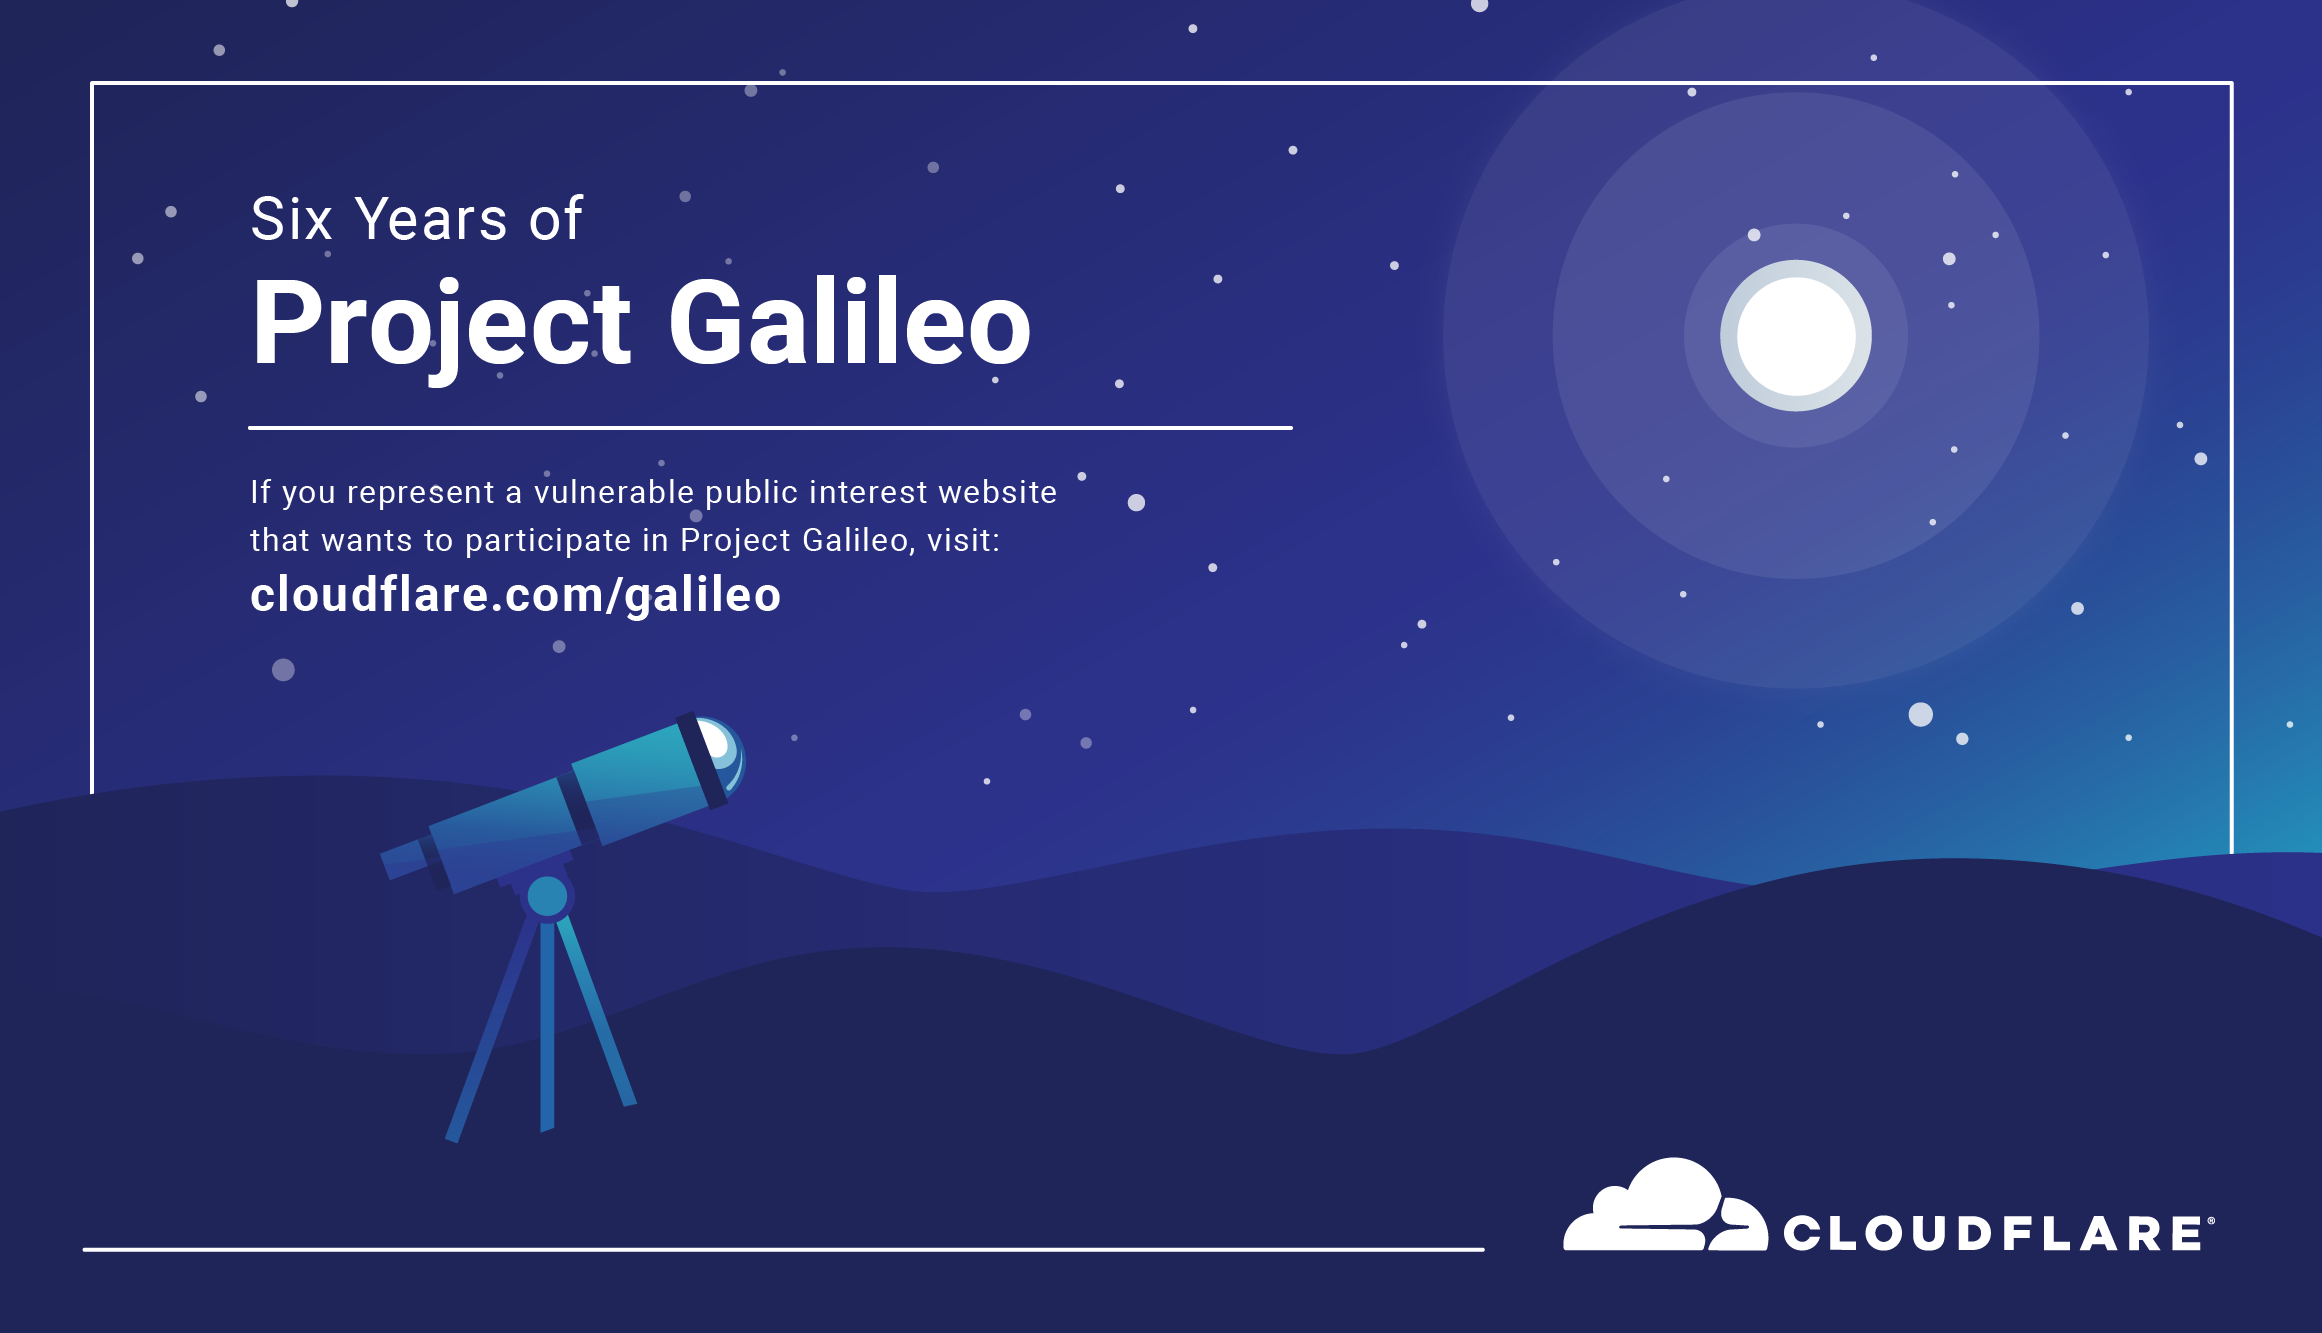 Project Galileo’s 6th year Anniversary: The Impact of COVID-19 on the most vulnerable groups on the Internet